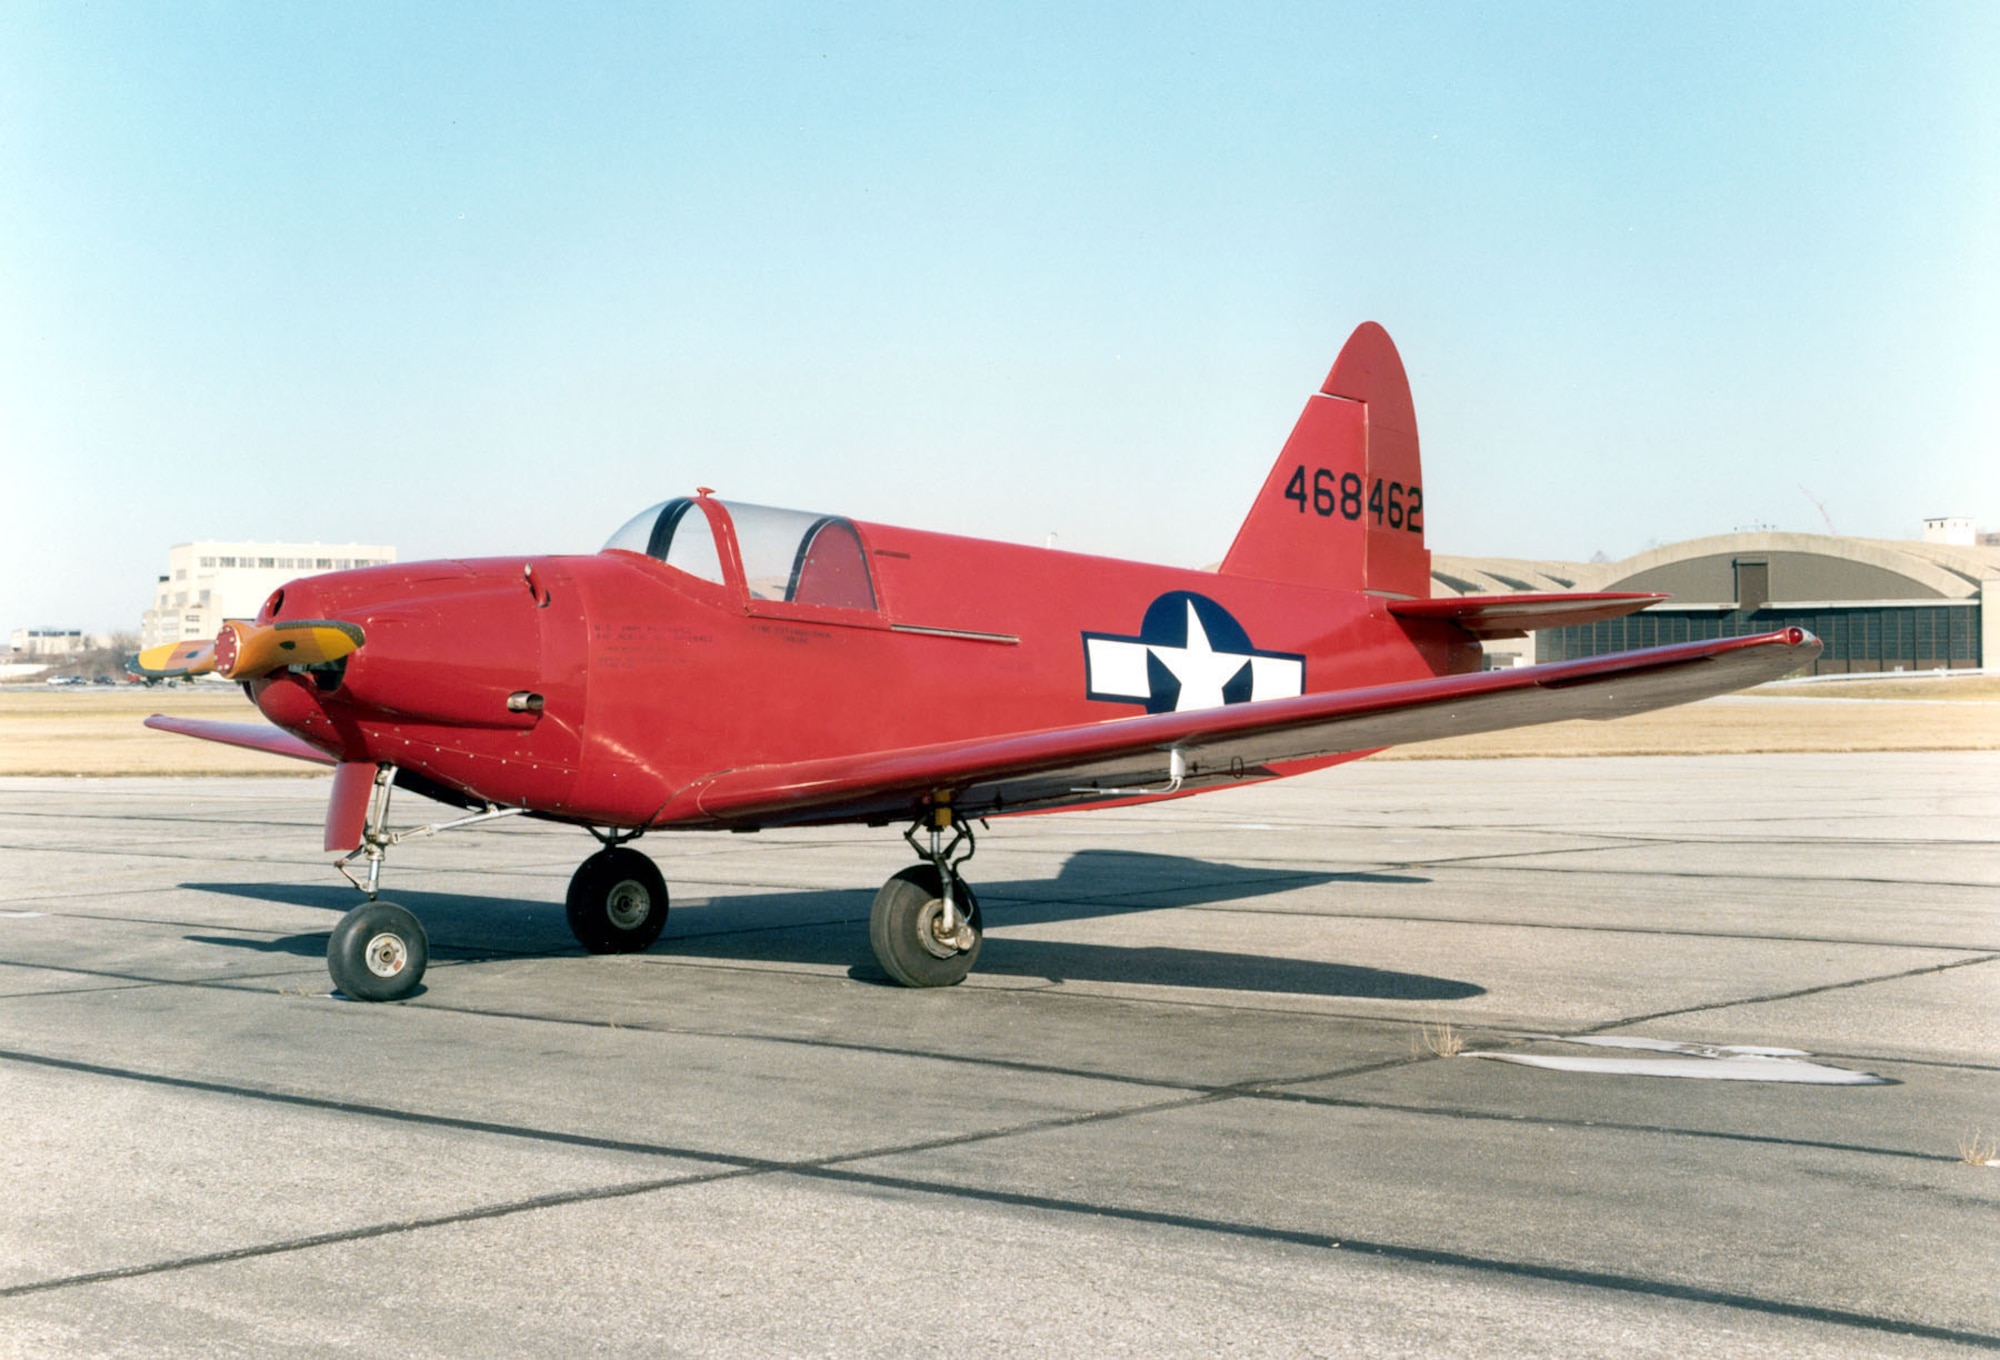 DAYTON, Ohio -- Culver PQ-14 at the National Museum of the United States Air Force. (U.S. Air Force photo)